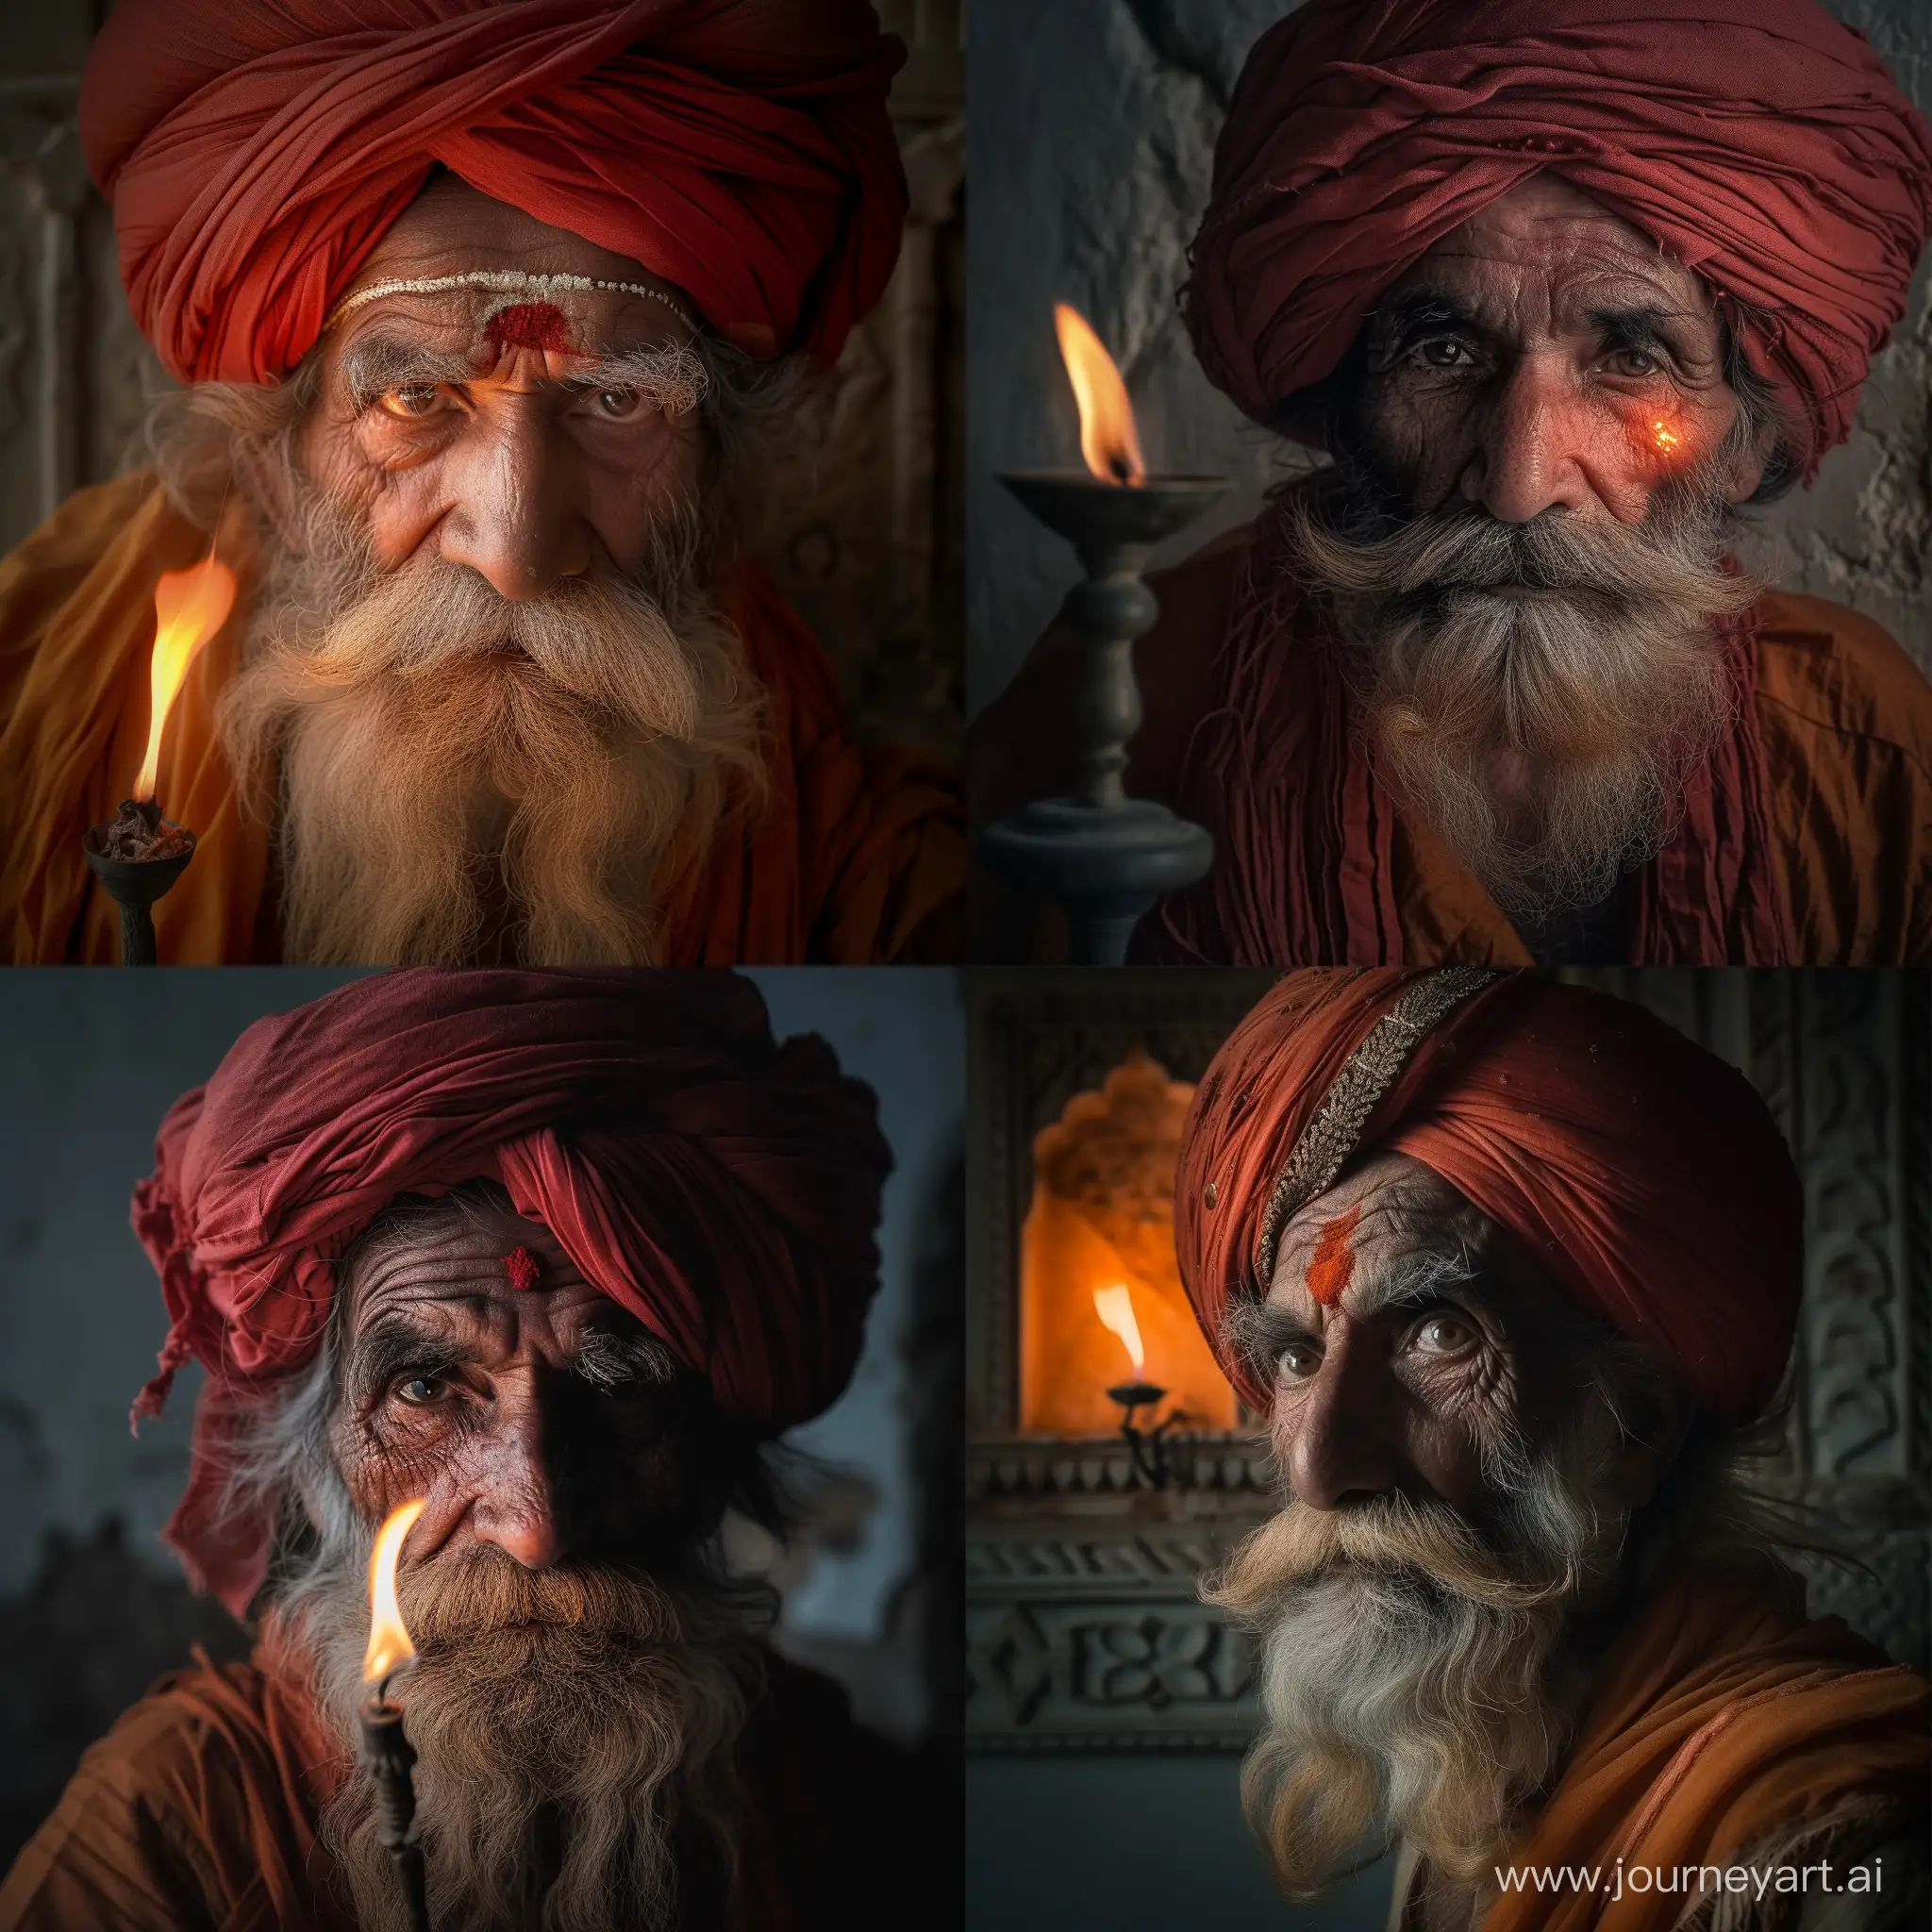 80 years old rabari portrait with moustache red turban  long beard       light in his face from a burning candel  in a old room 50mm fujixt4  soft shadows fotorealist